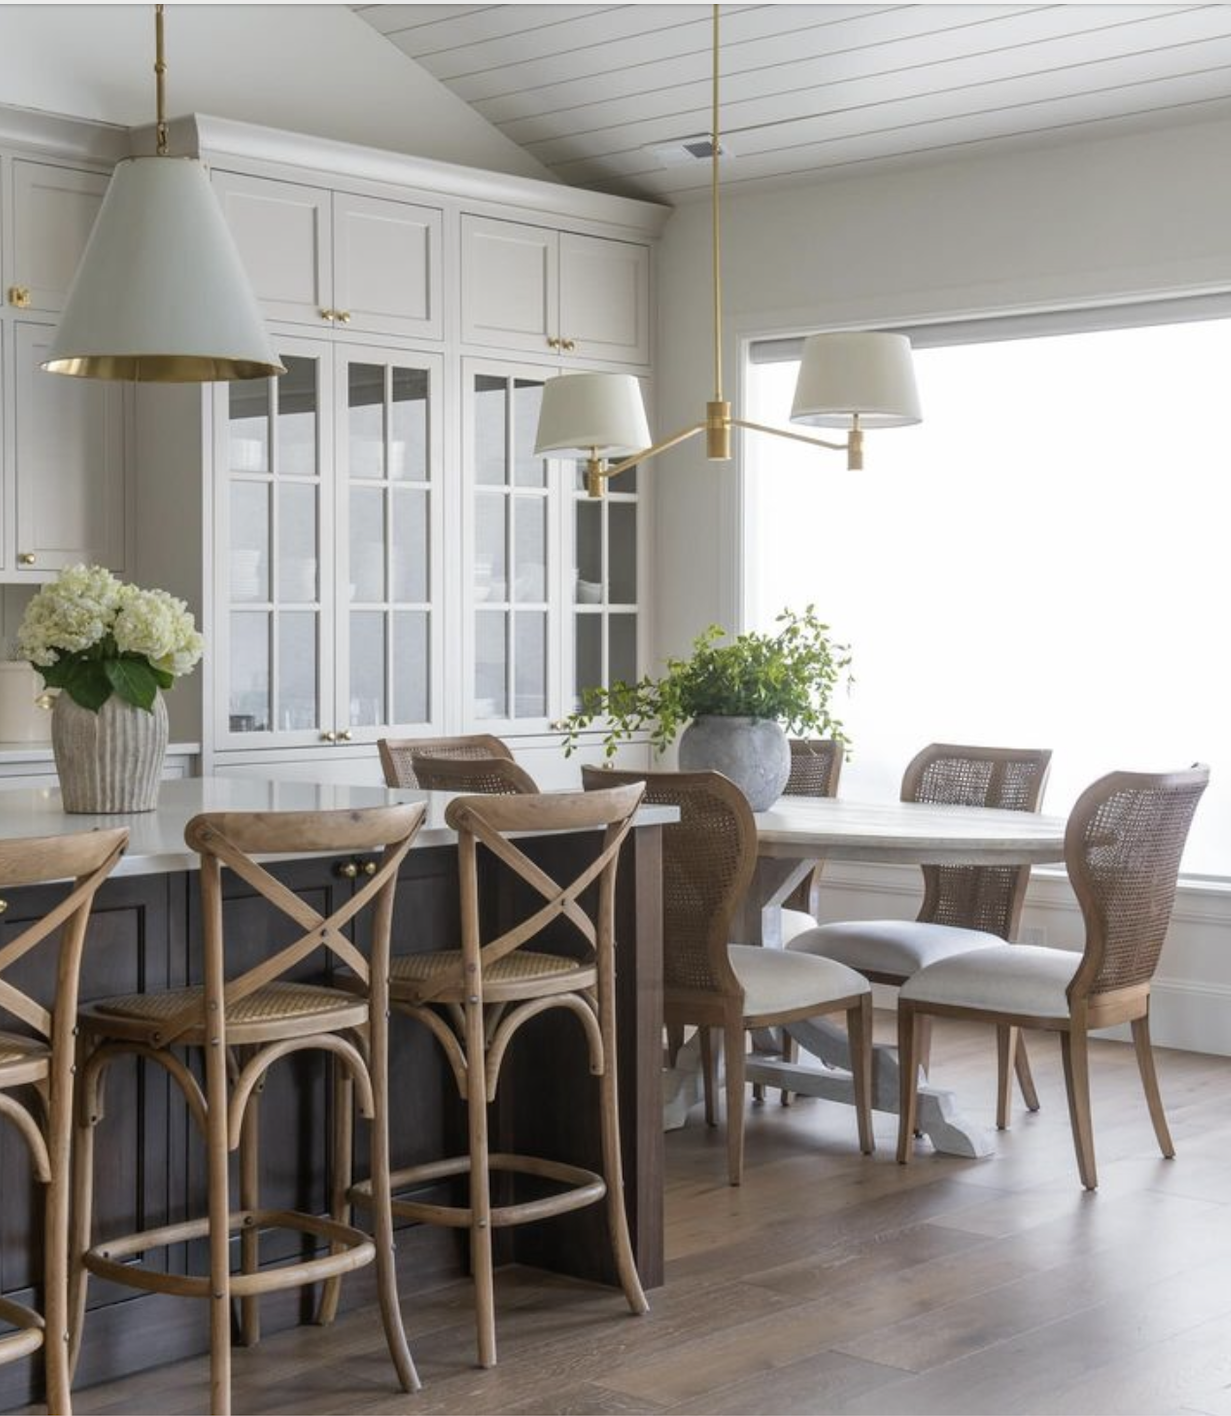 a neutral kitchen and breakfast nook work to create a welcoming space 